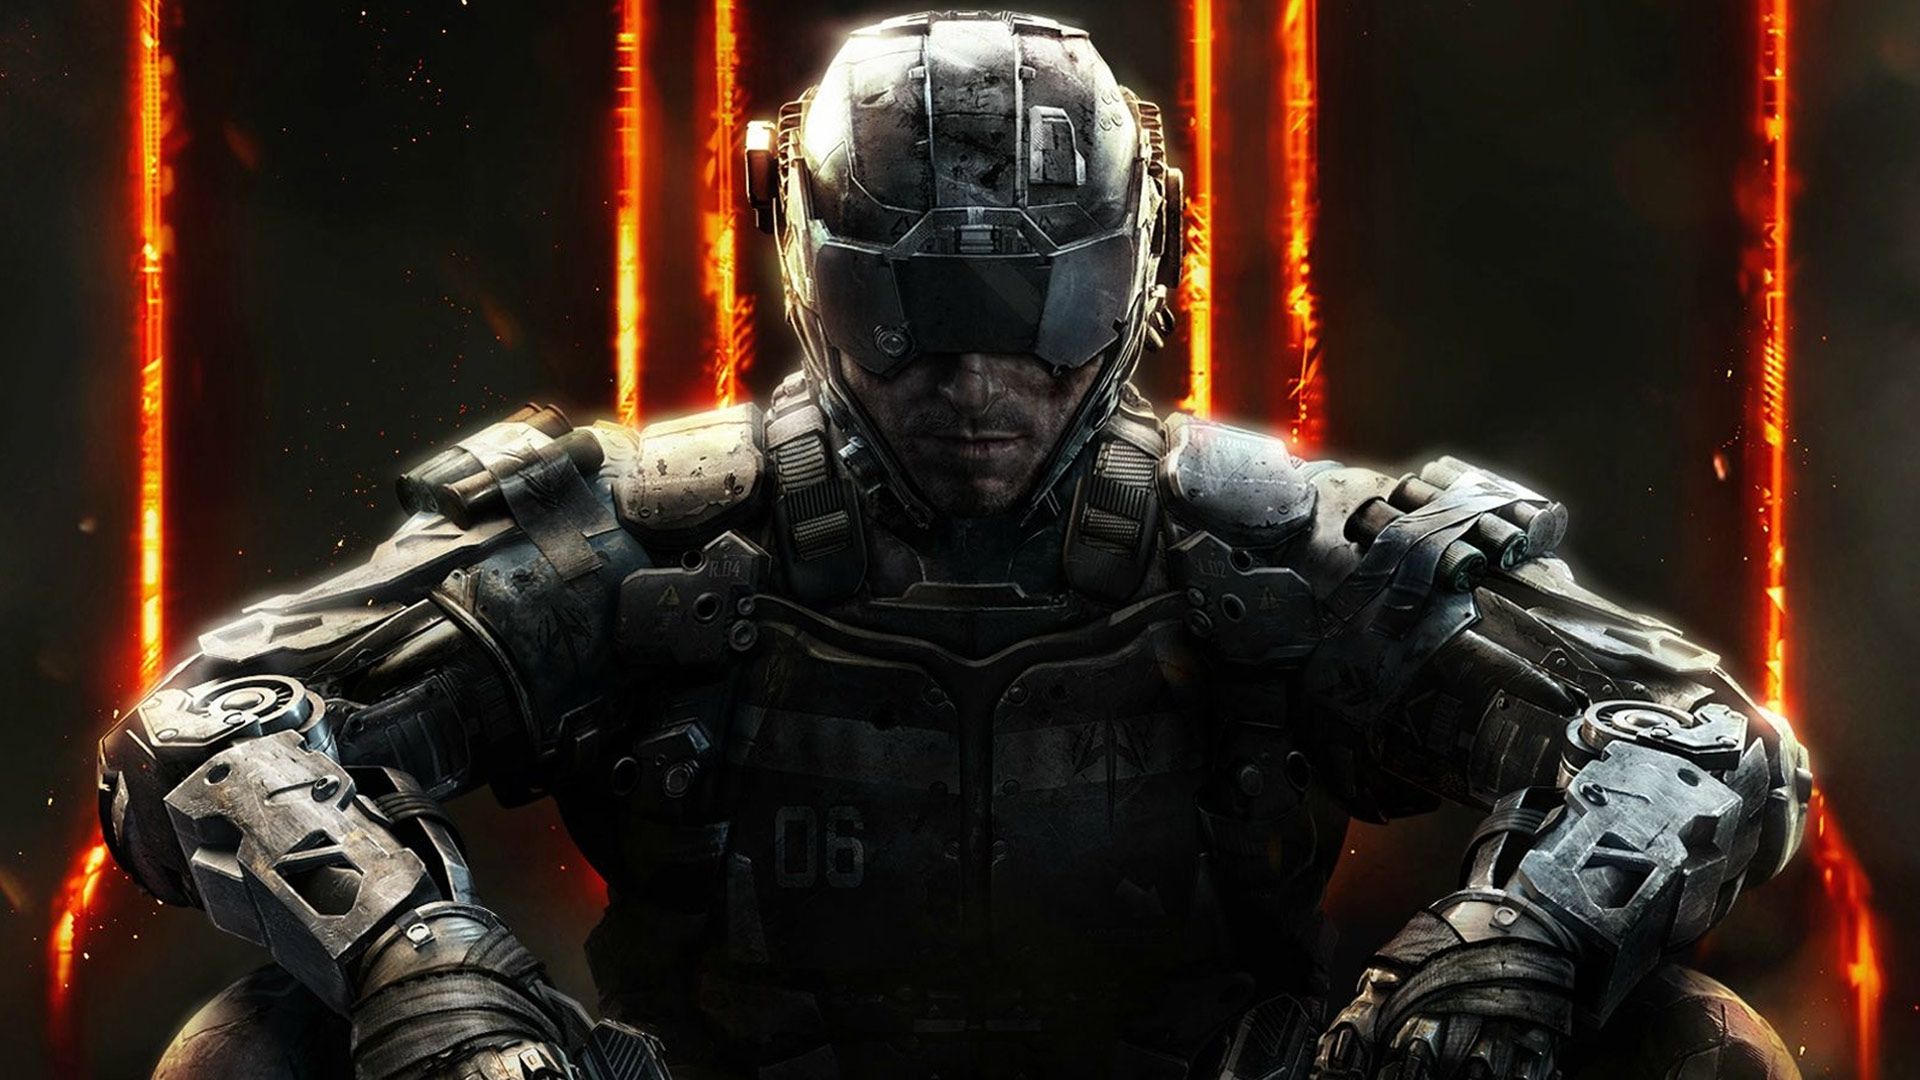 Call of duty black ops 3 wallpapers – Free full hd wallpapers for ...